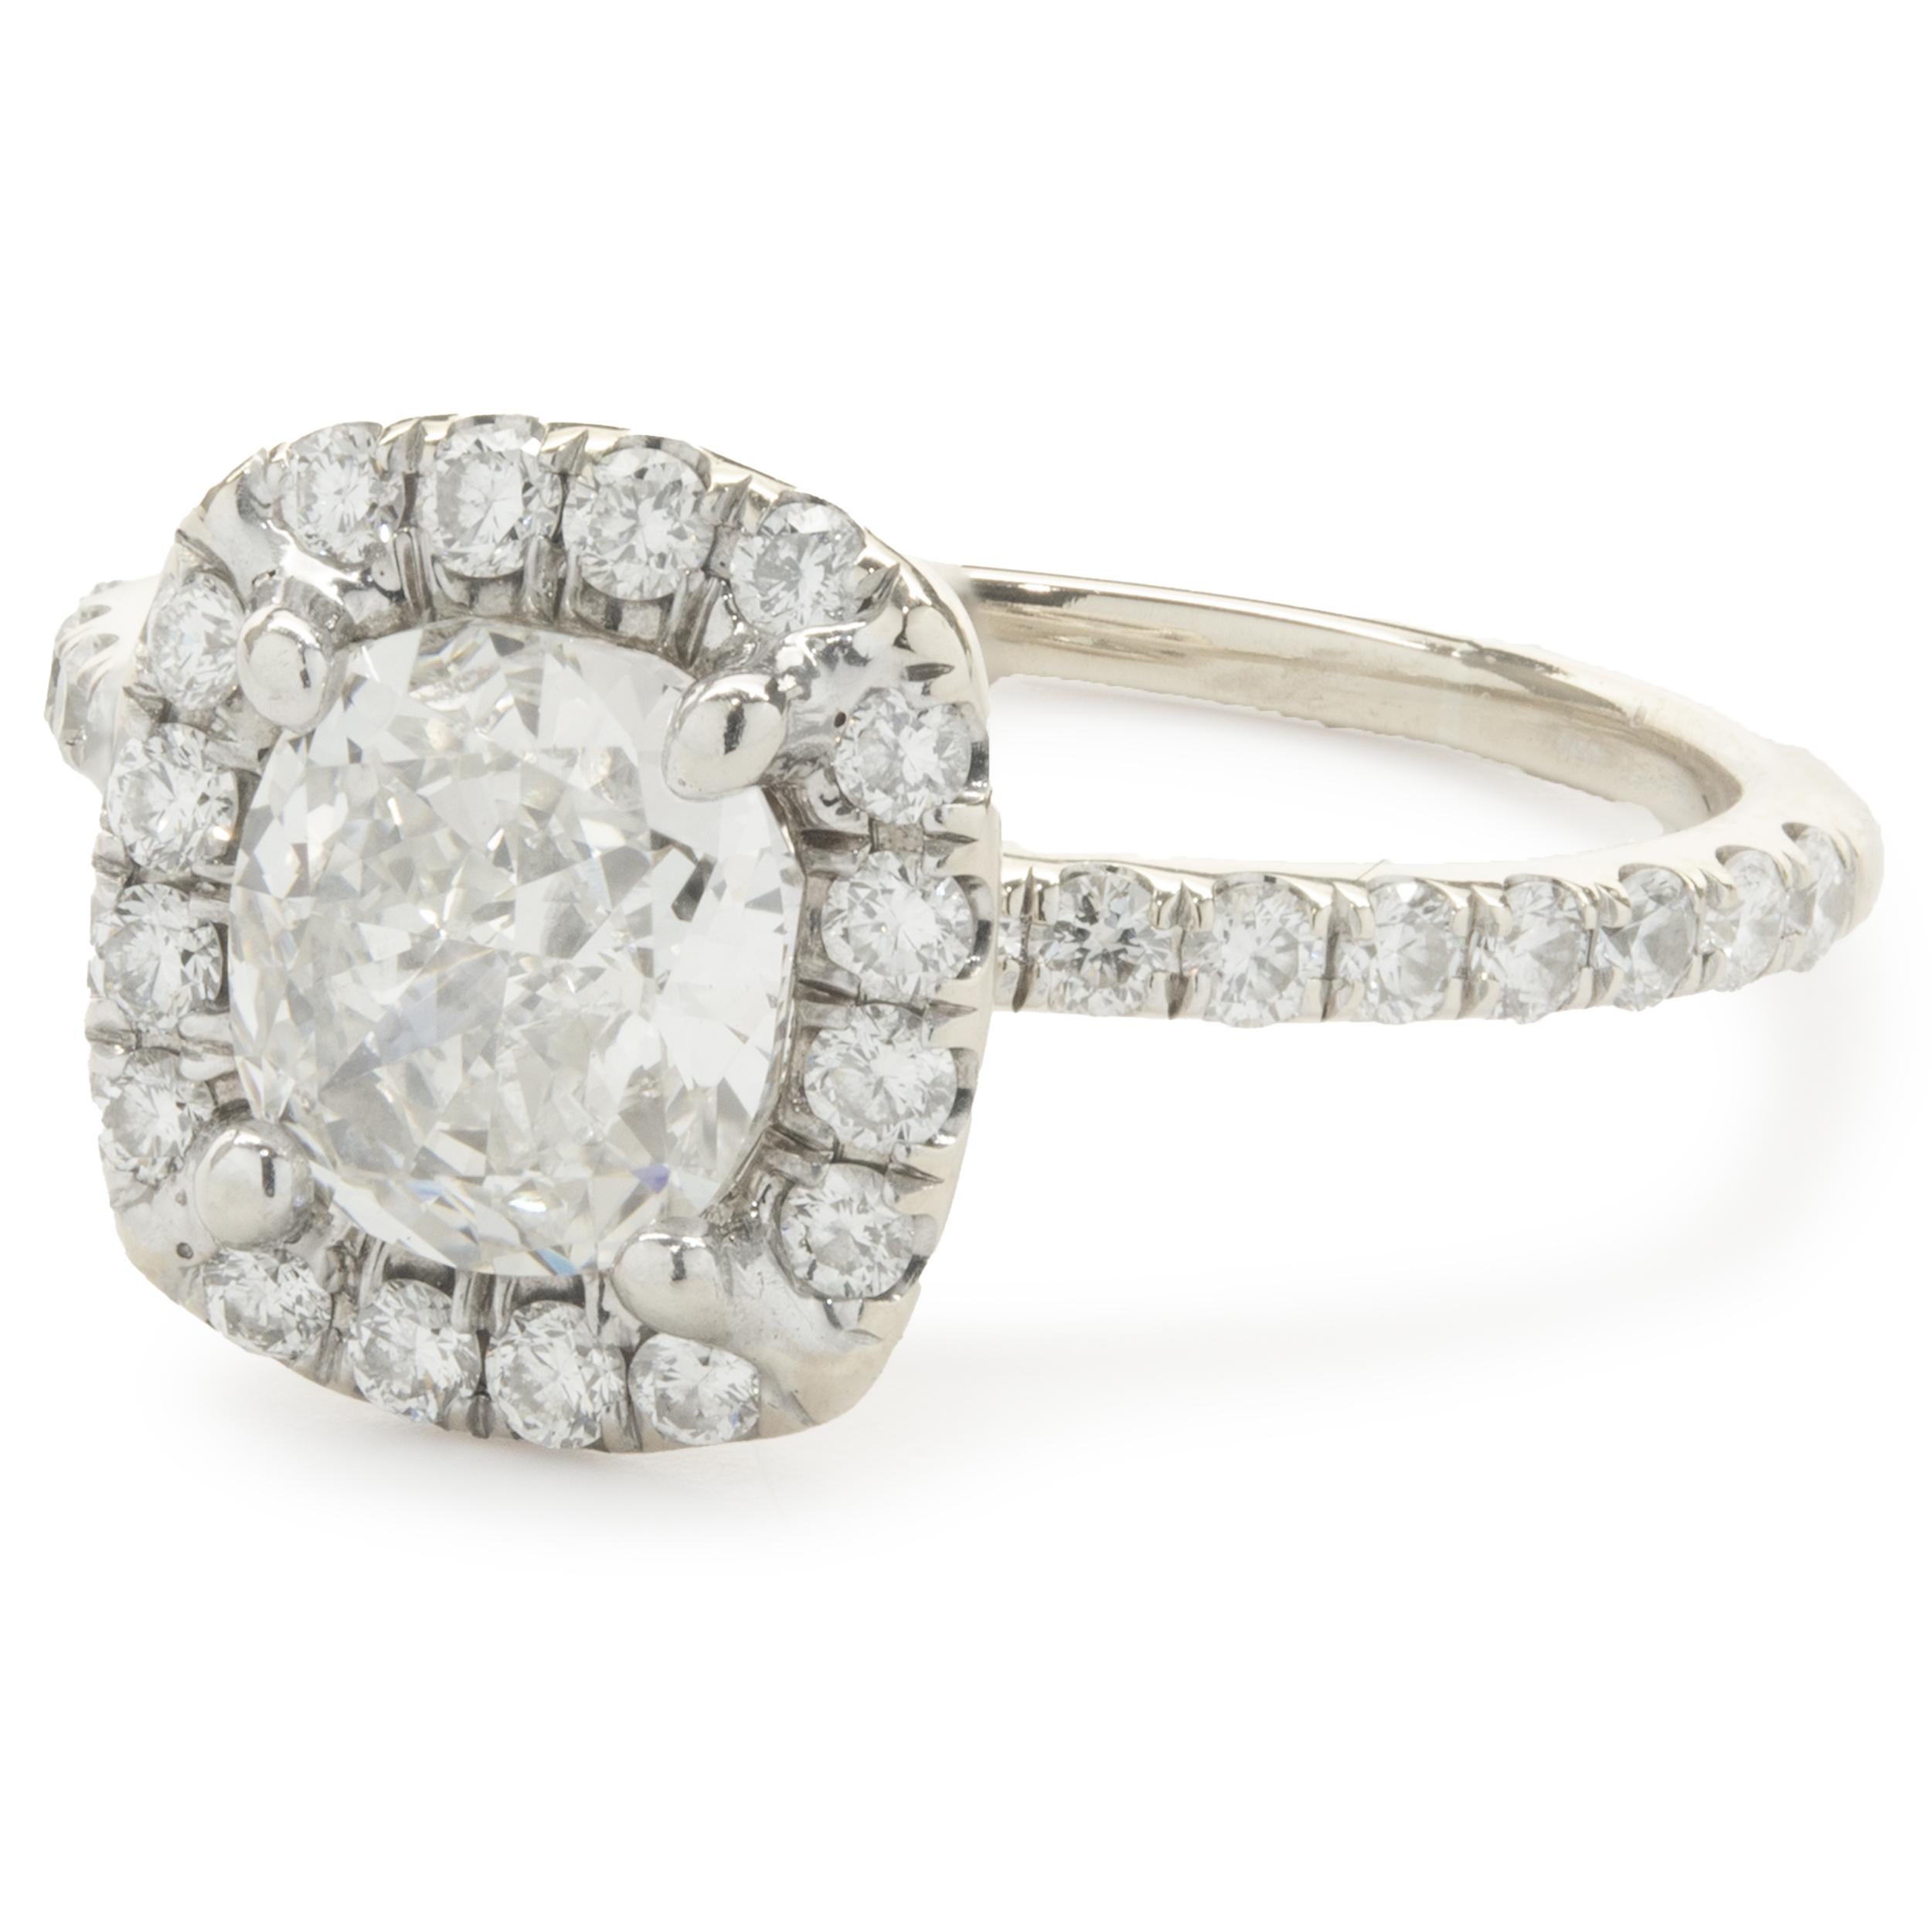 Platinum Cushion Cut Diamond Engagement Ring In Excellent Condition For Sale In Scottsdale, AZ